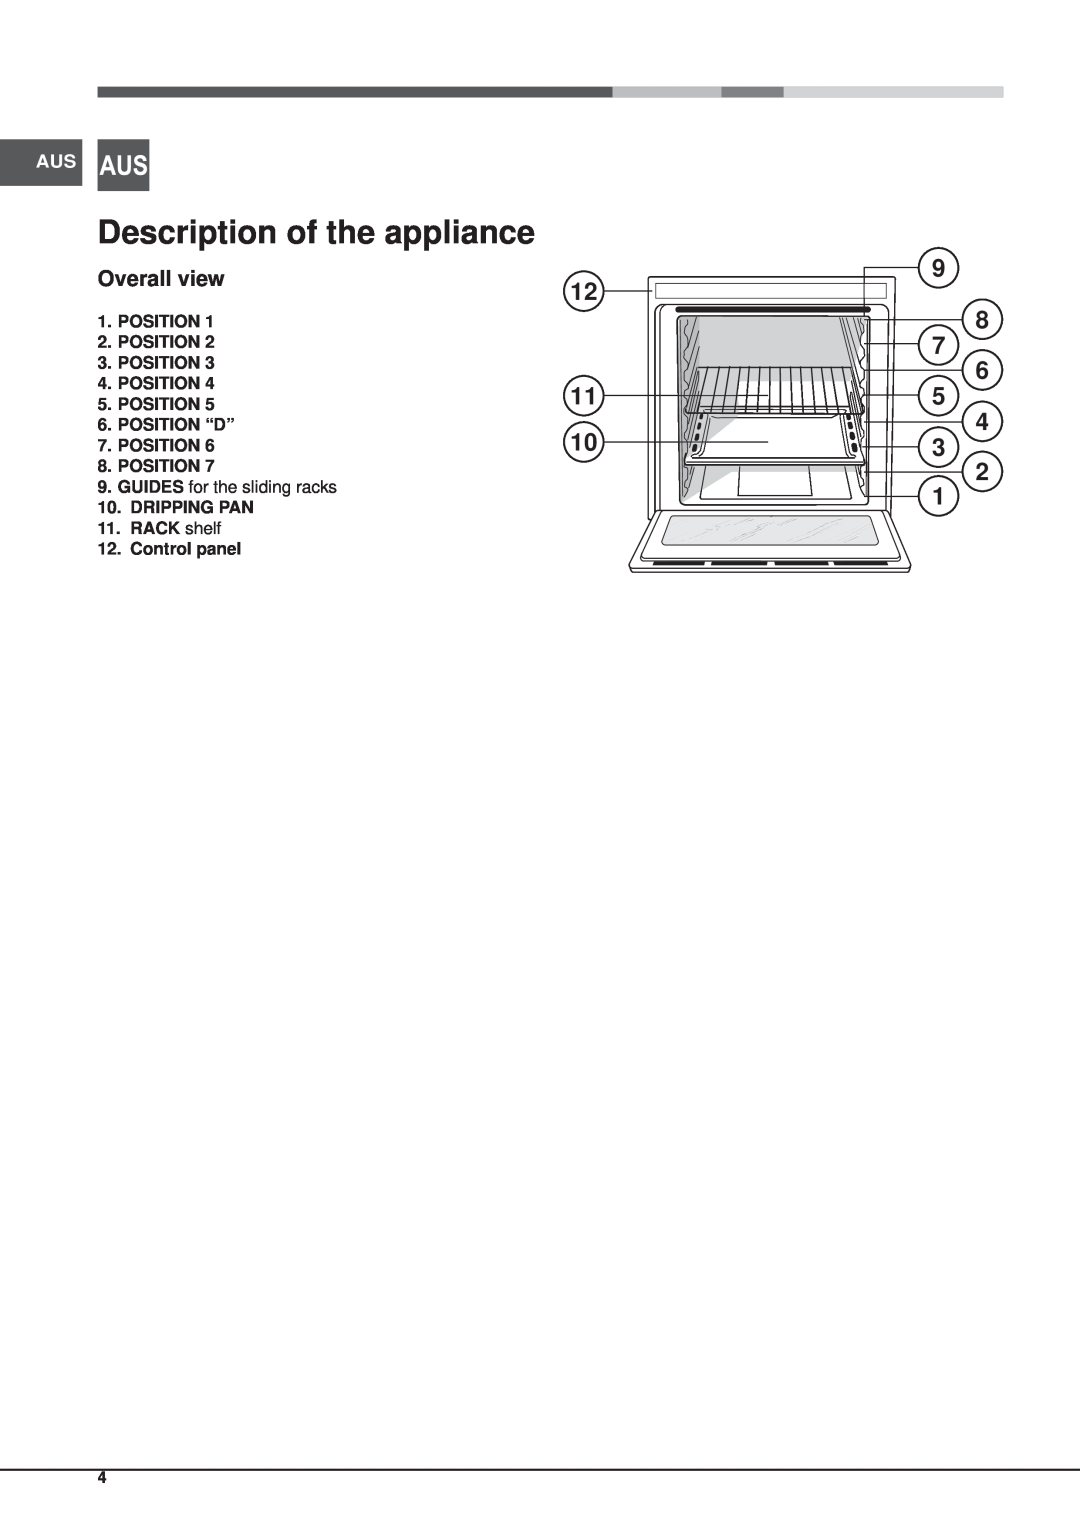 Ariston OK 892EL S P X AUS, OK 892EL S P AUS manual Description of the appliance, 9 8 7, Overall view, Position “D” 